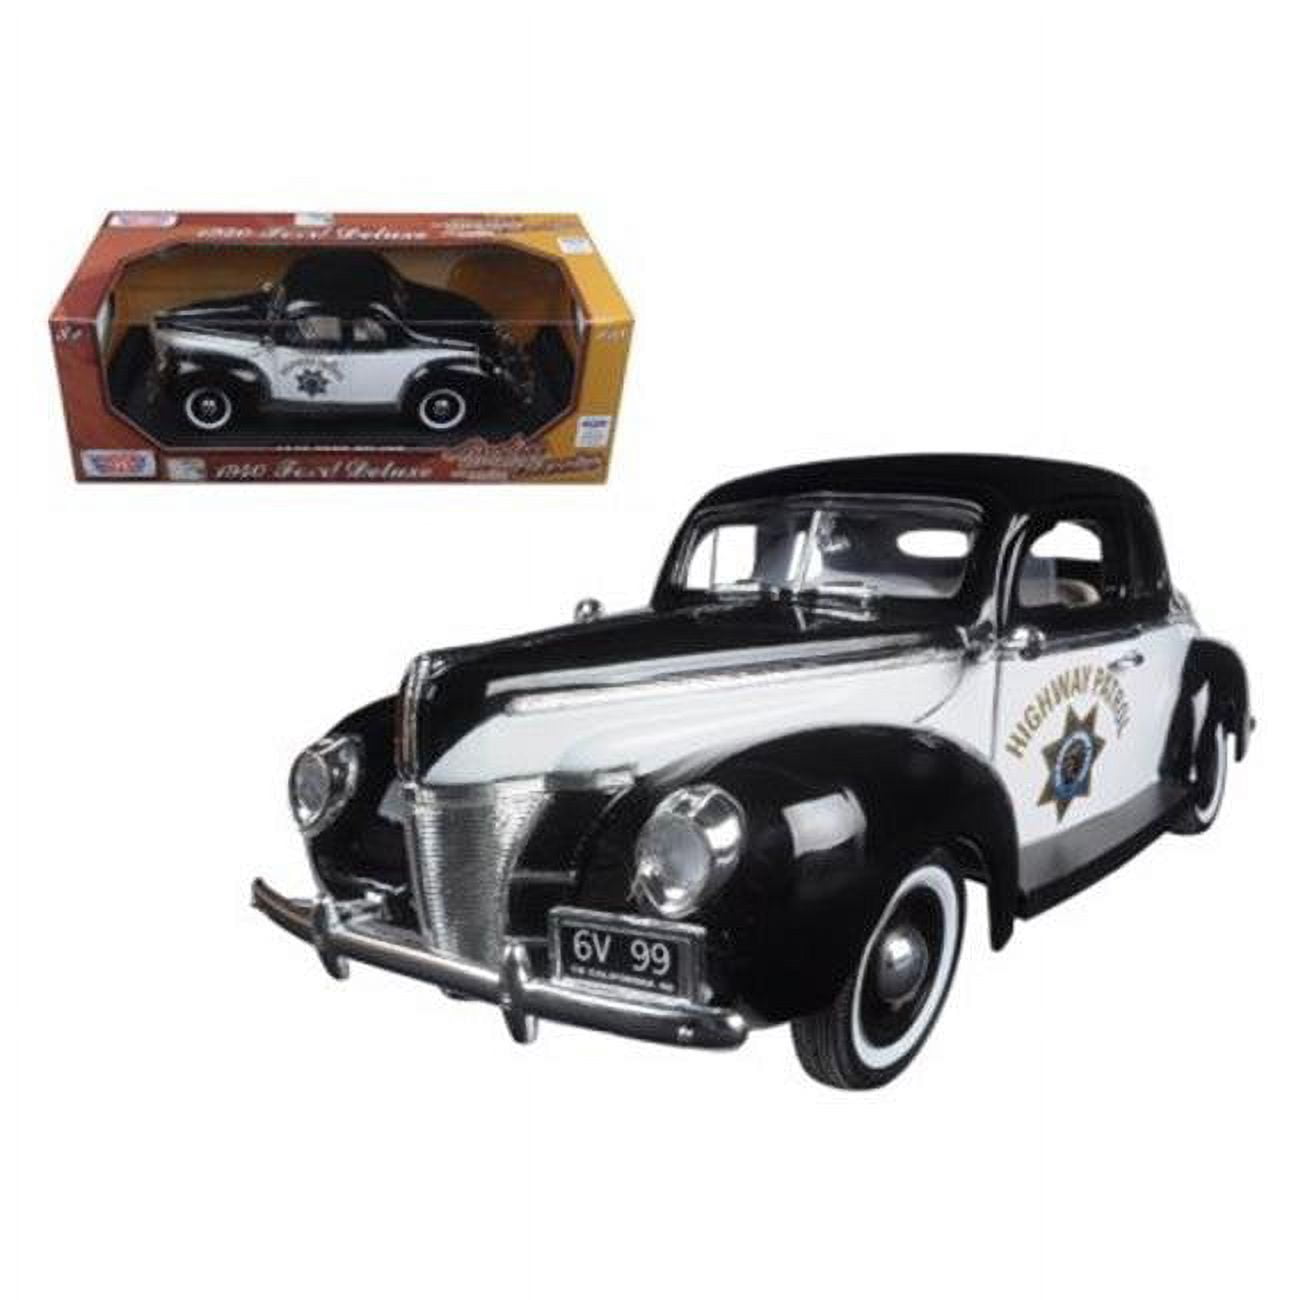 73108POL-TC 1 by 18 1940 Ford Coupe Deluxe California Highway Patrol Timeless Classics Diecast Model Car -  MOTORMAX